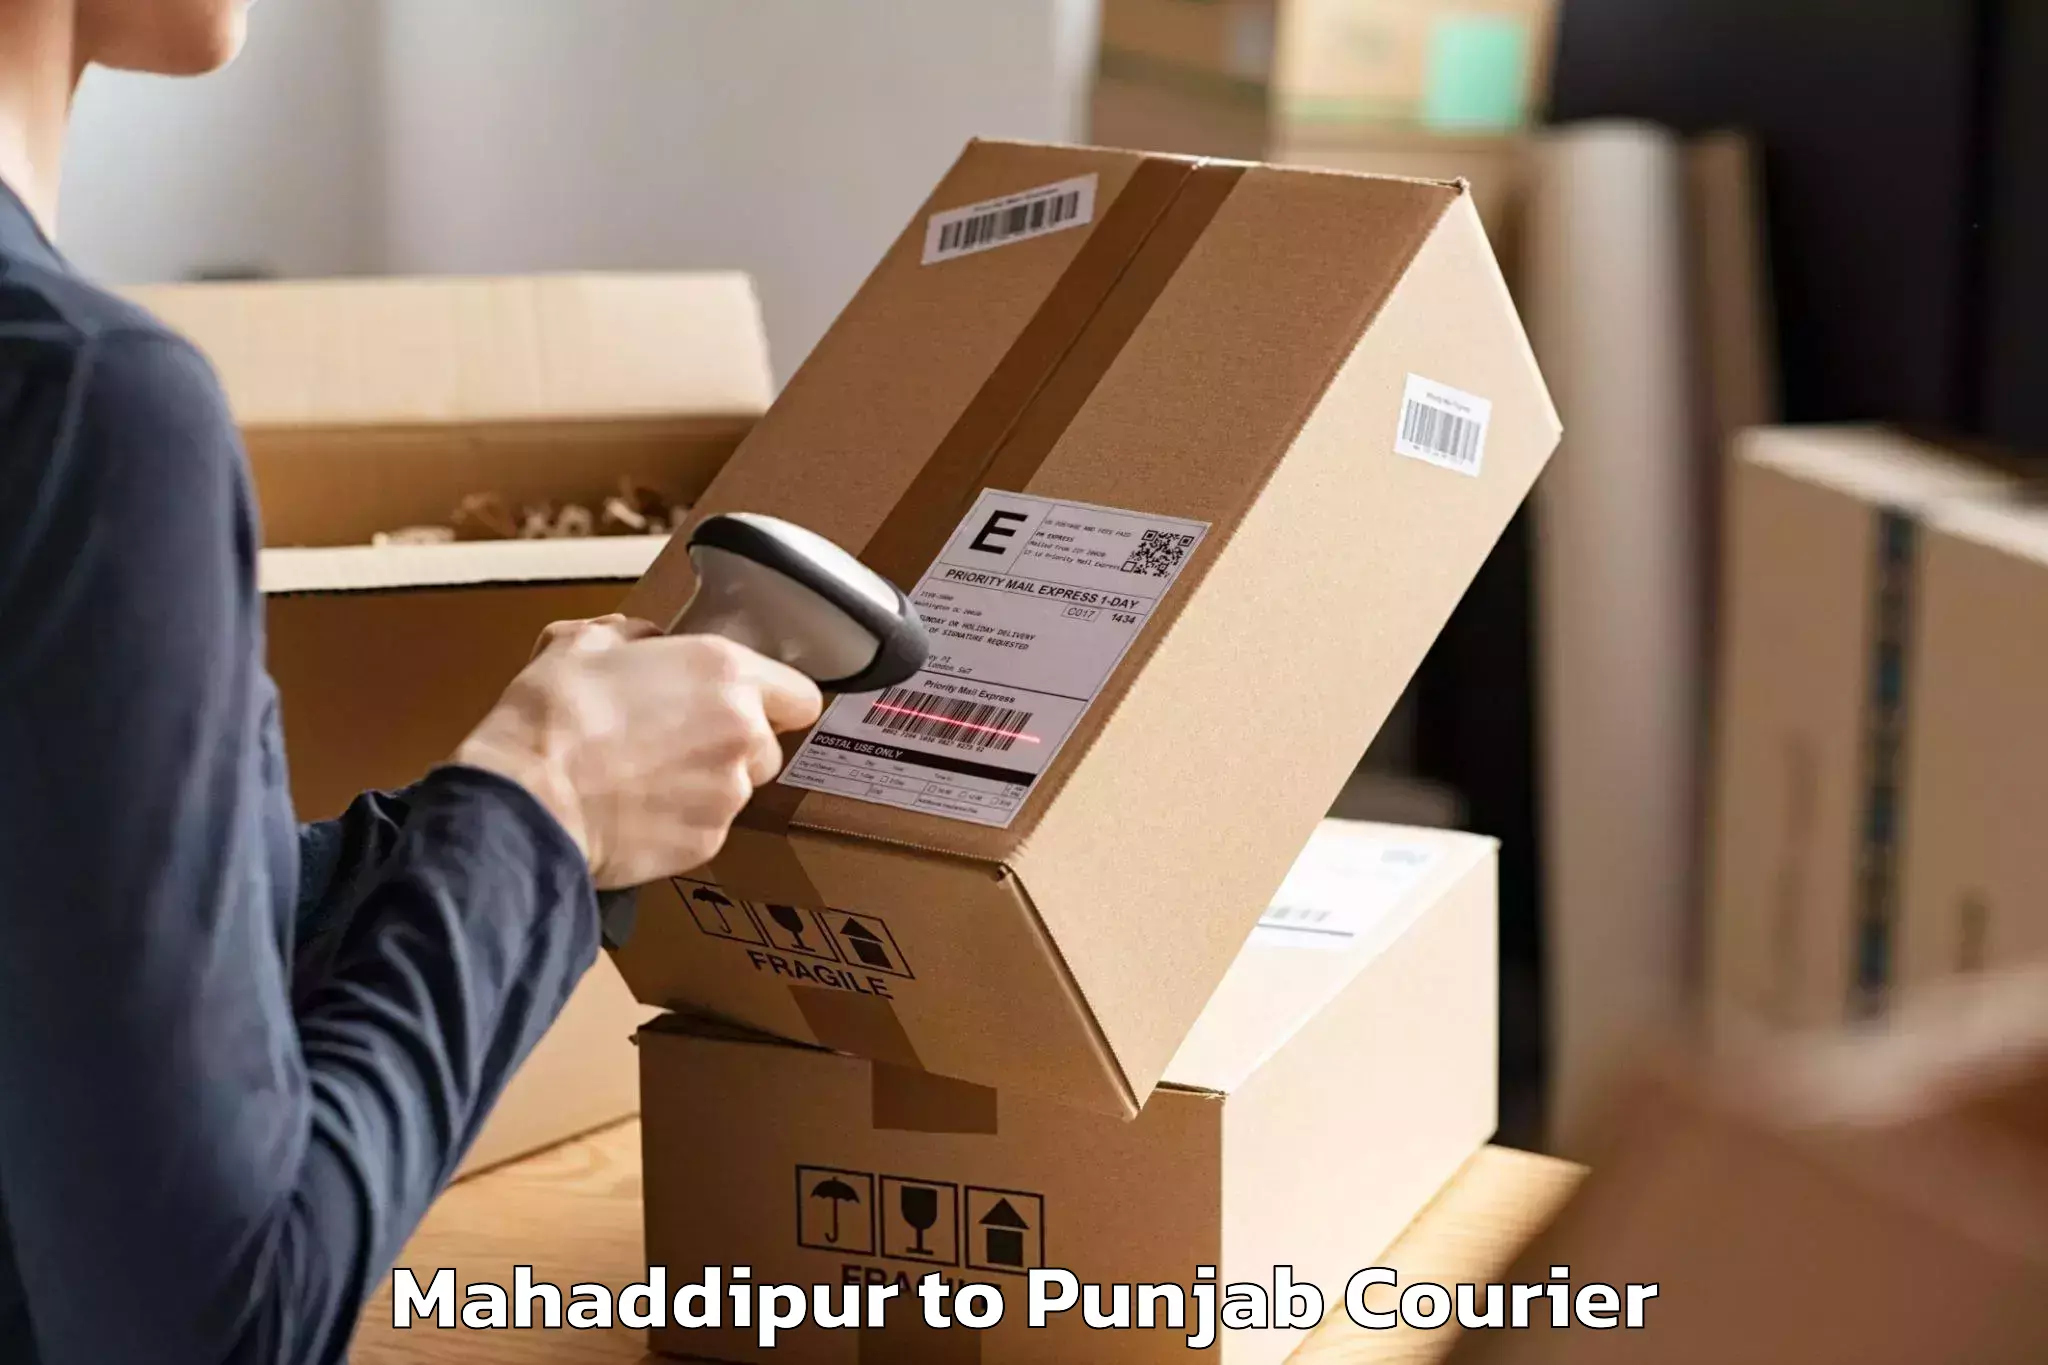 Efficient packing and moving Mahaddipur to Sirhind Fatehgarh